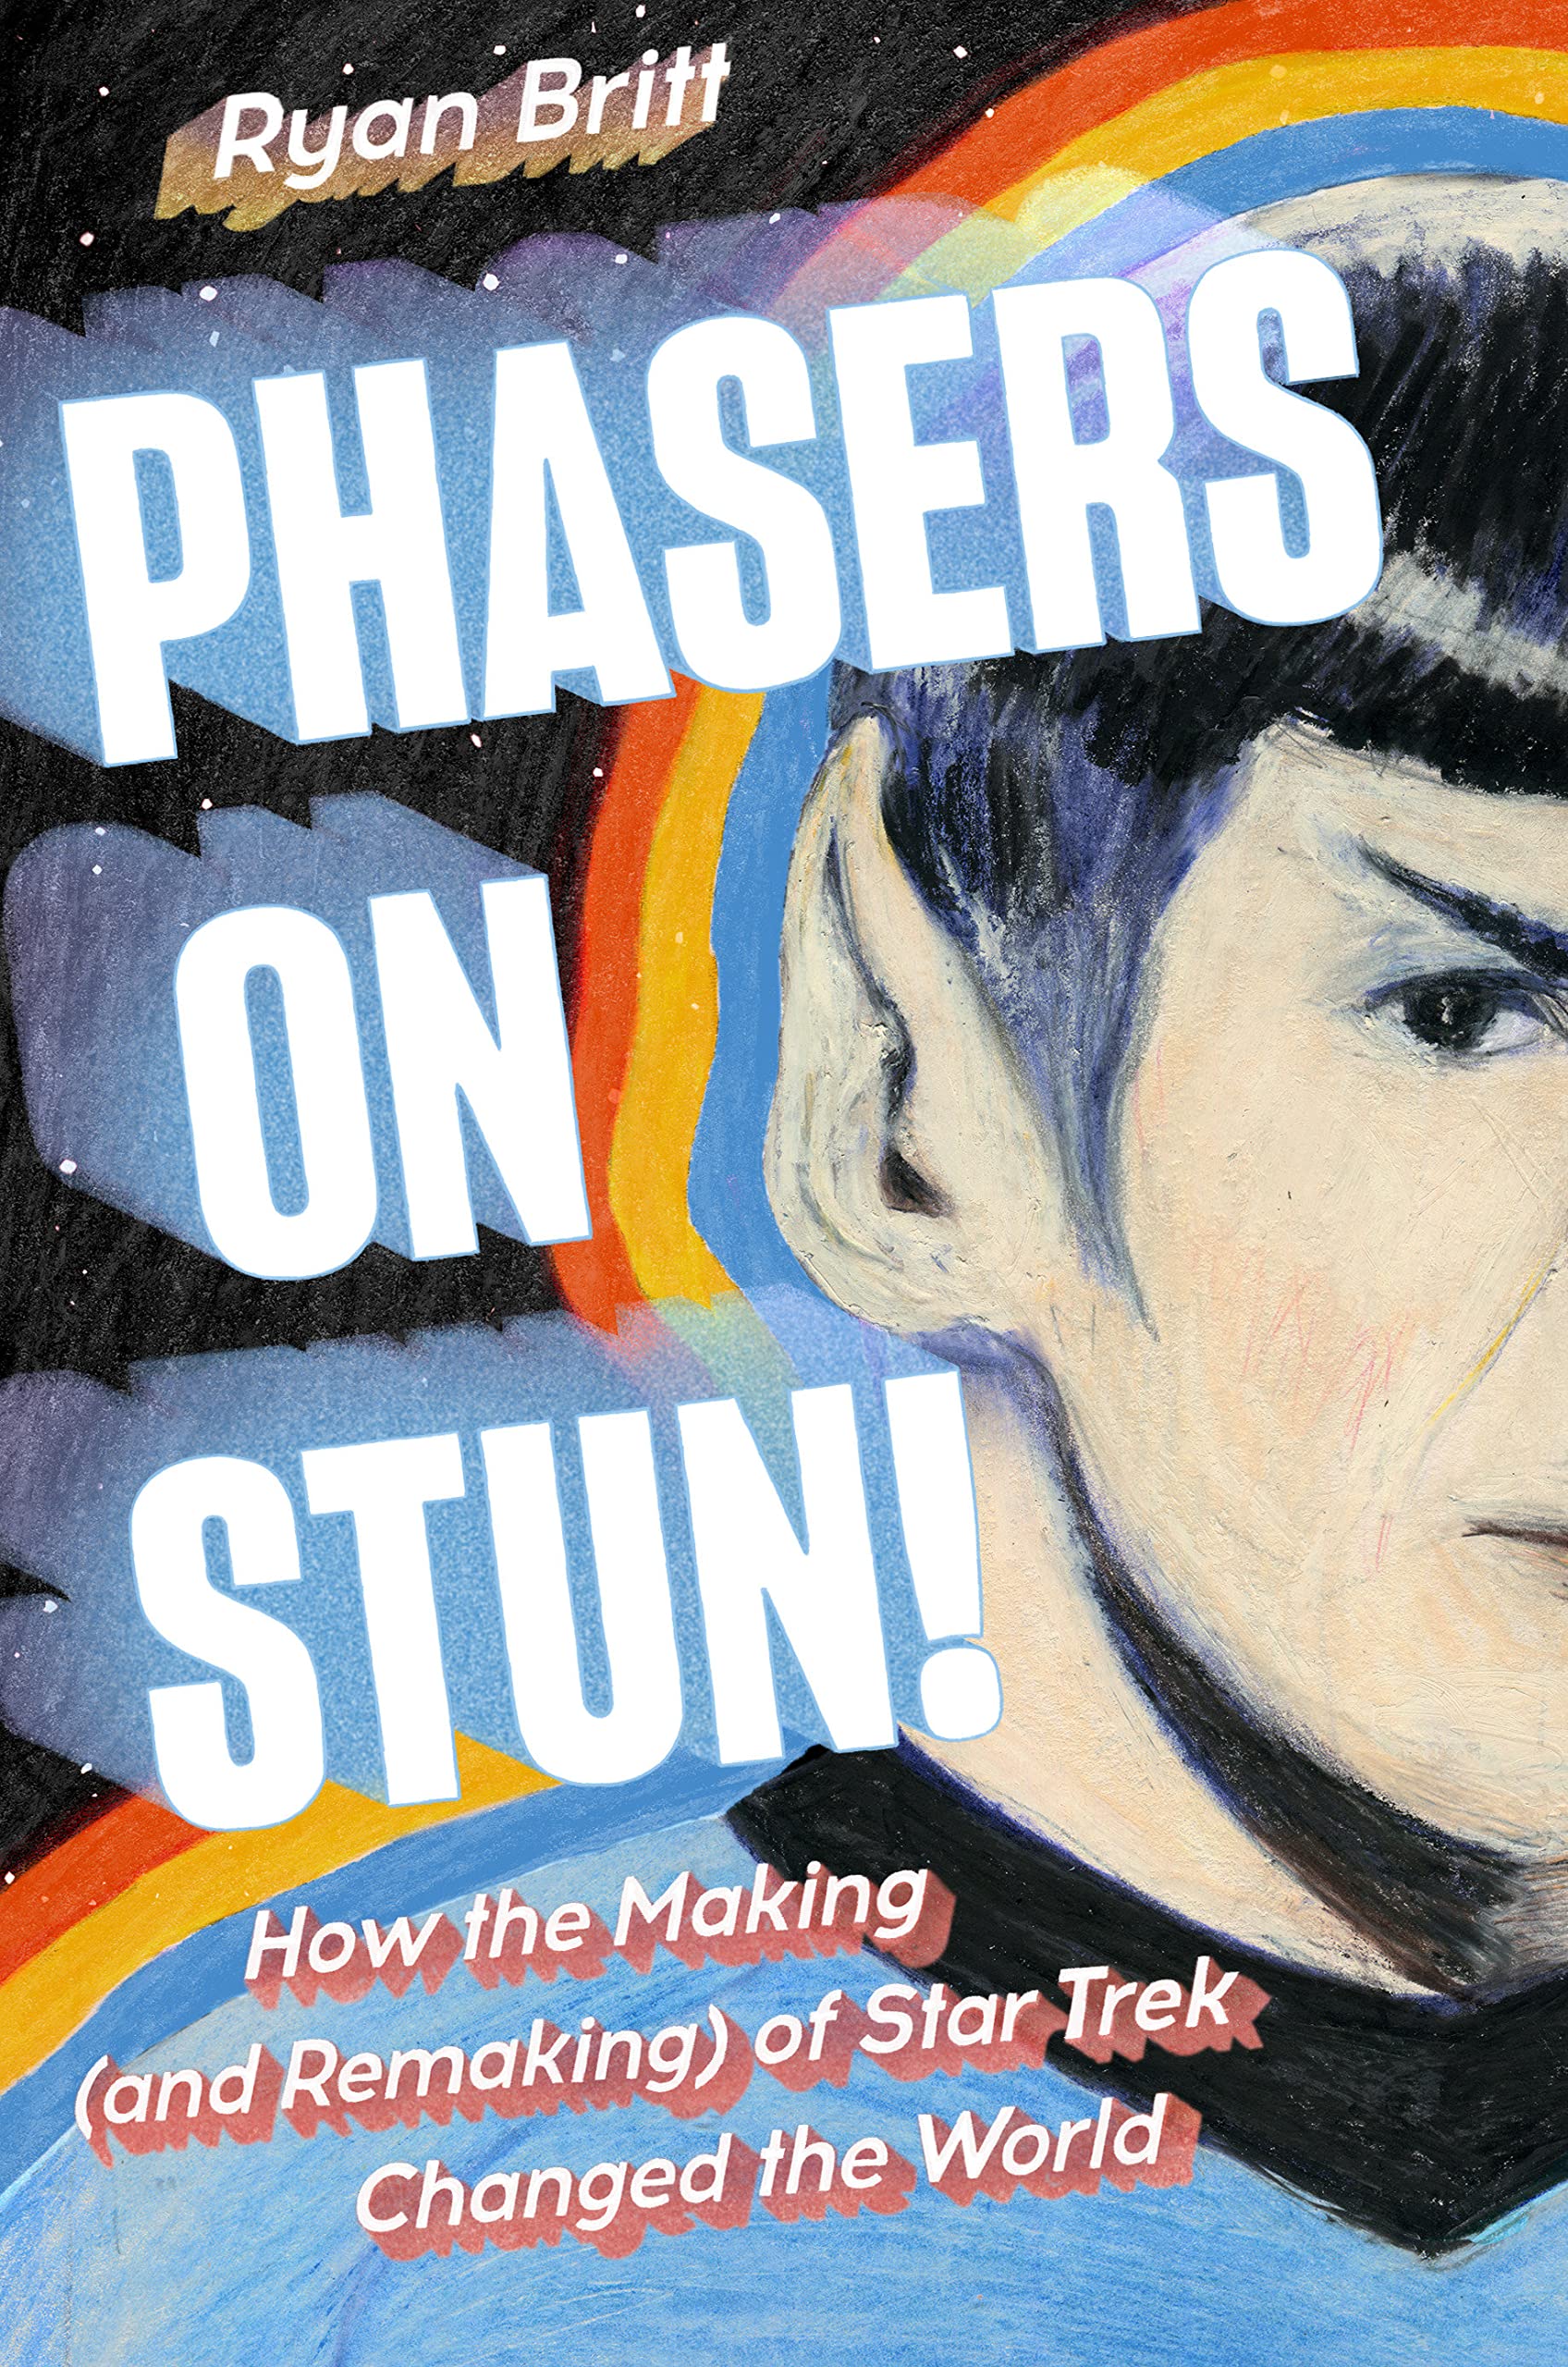 Phasers in a stun!